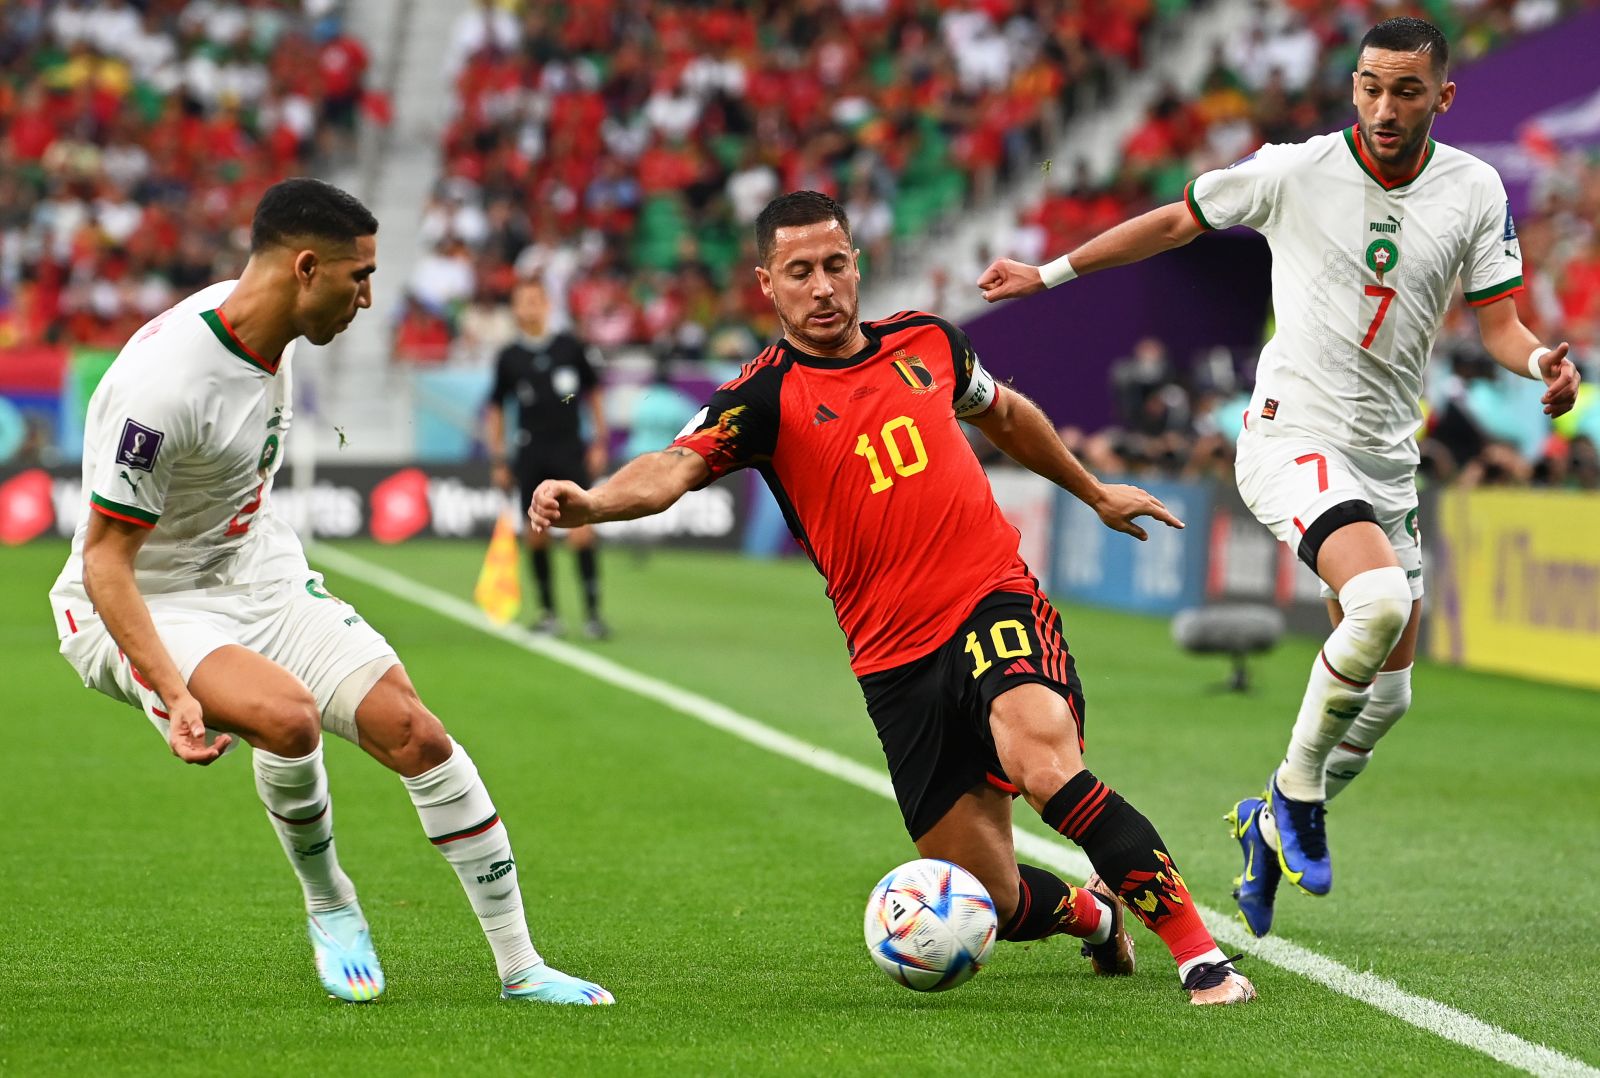 epa10332053 Eden Hazard (C) of Belgium in action against Moroccan players Achraf Hakimi (L) and Hakim Ziyech (R) during the FIFA World Cup 2022 group F soccer match between Belgium and Morocco at Al Thumama Stadium in Doha, Qatar, 27 November 2022.  EPA/Georgi Licovski